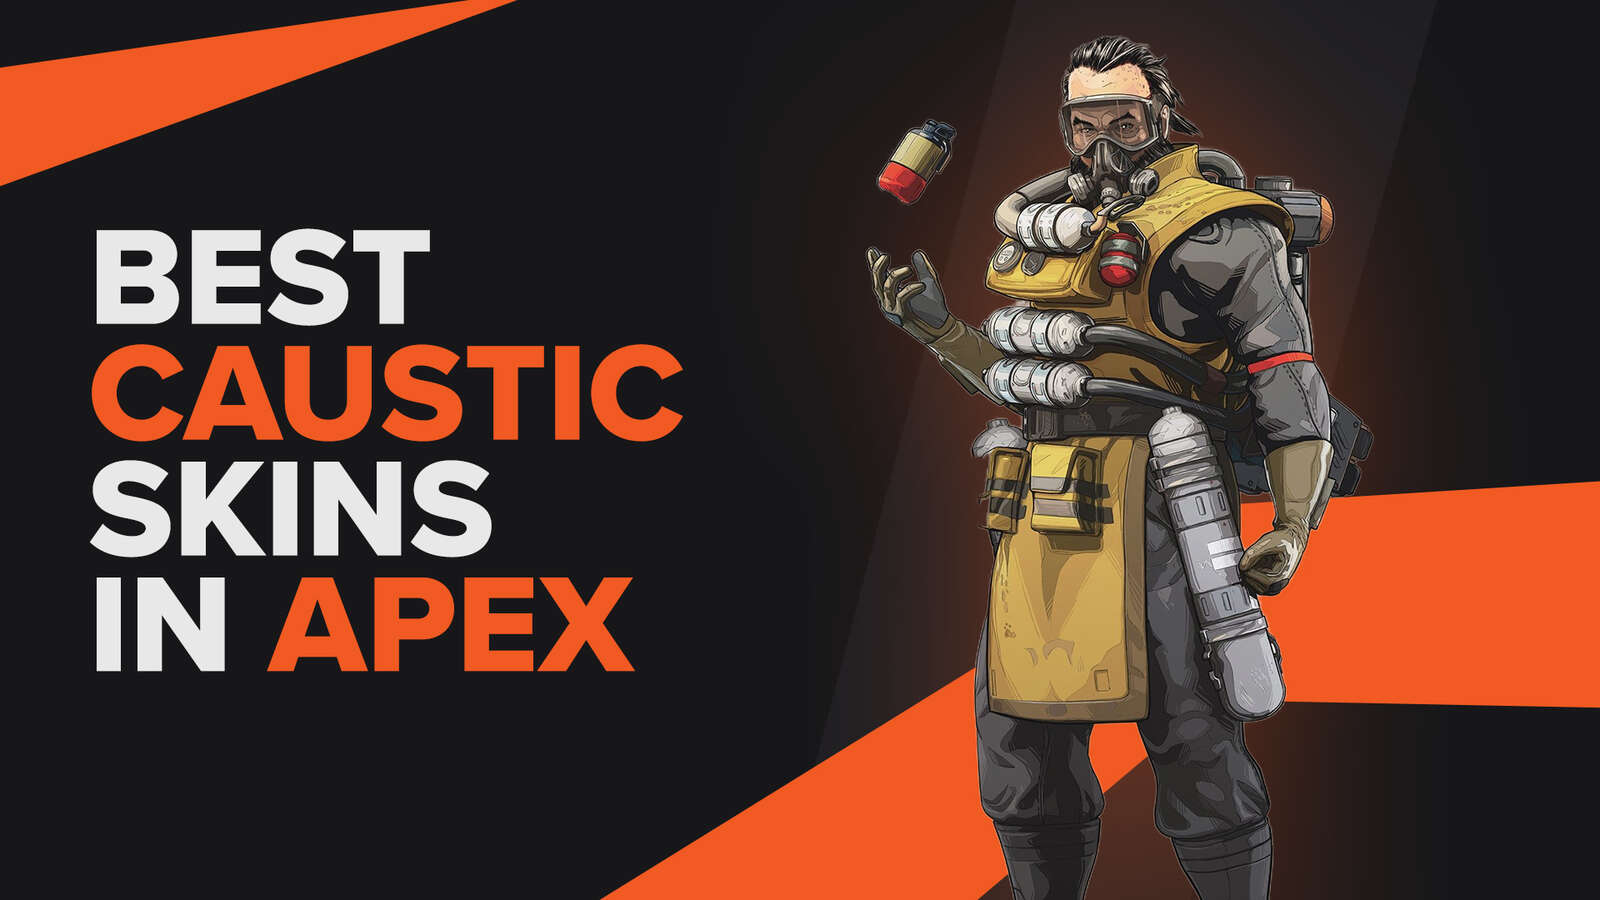 The Best Caustic Skins in Apex Legends That make You Stand Out